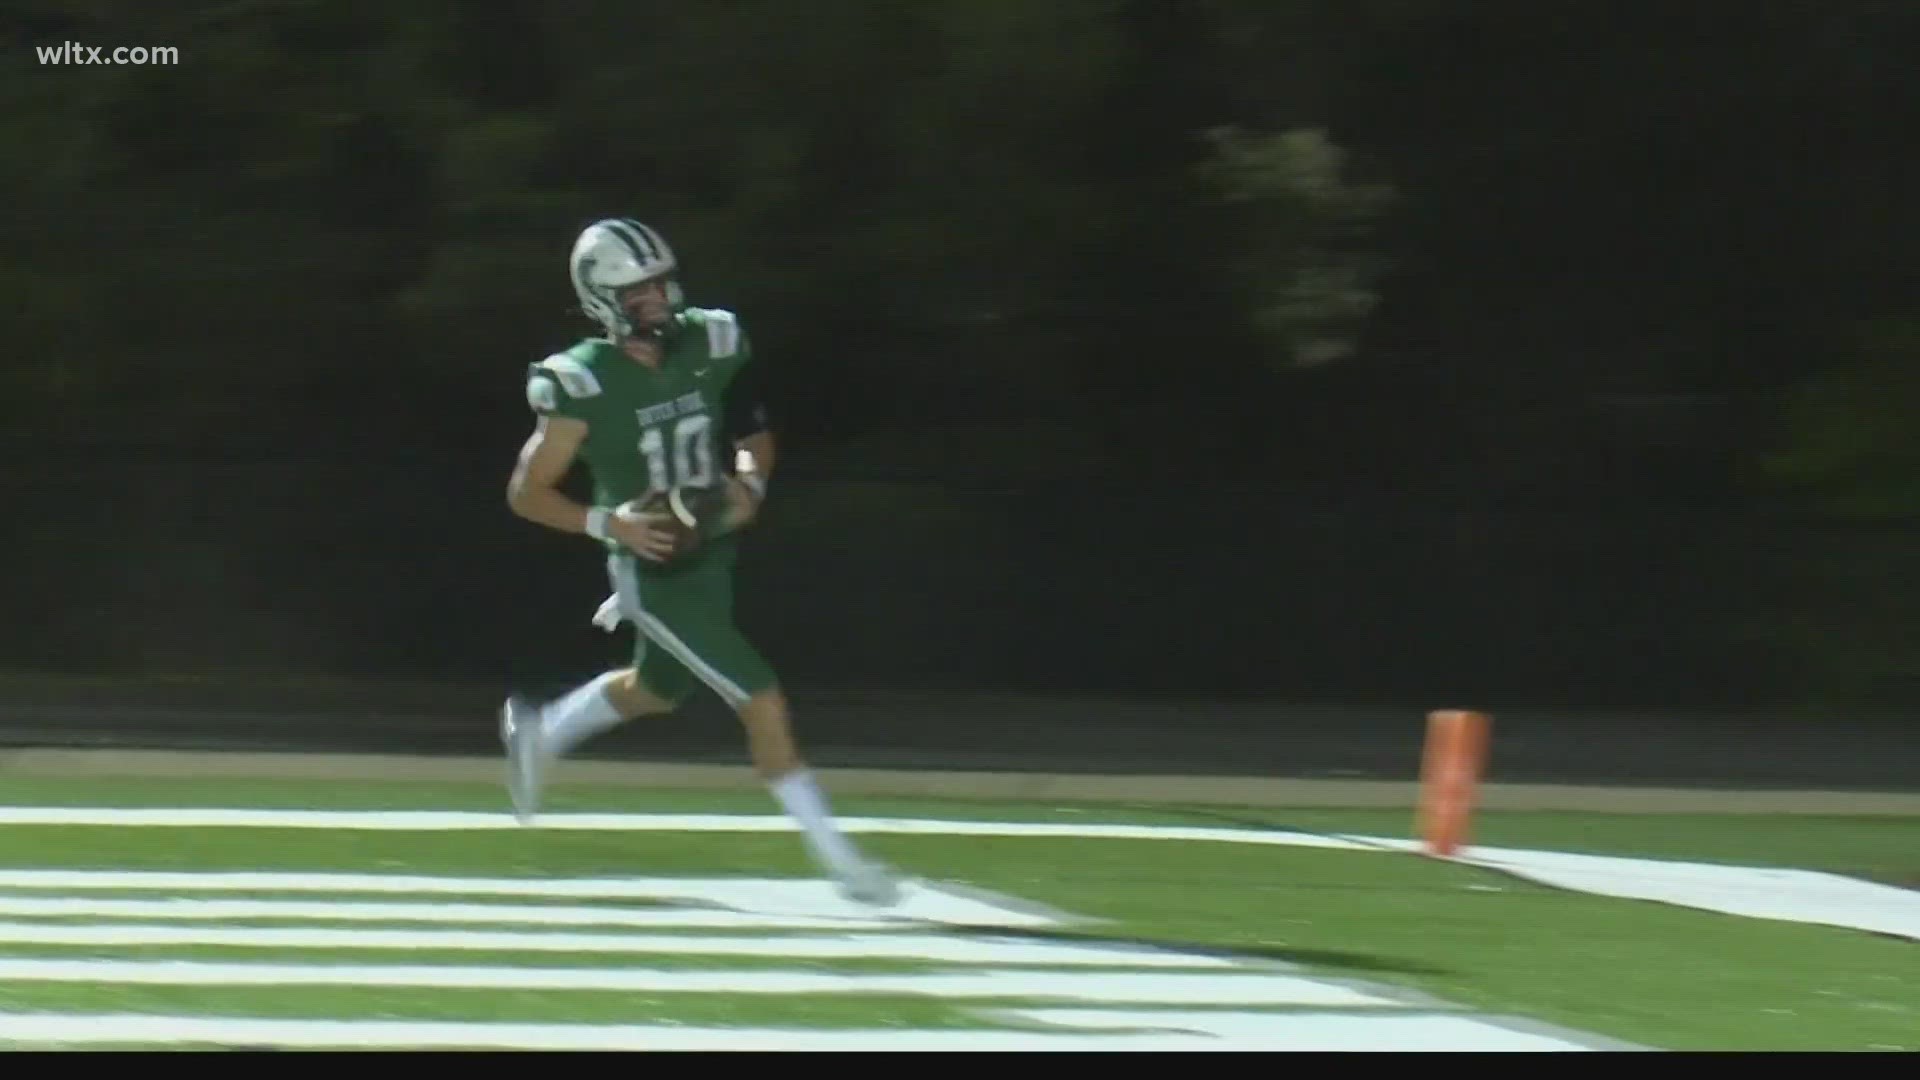 Dutch Fork quarterback Aliam Appler will attend FAU with the hopes of earning a spot on the roster as a walk-on.